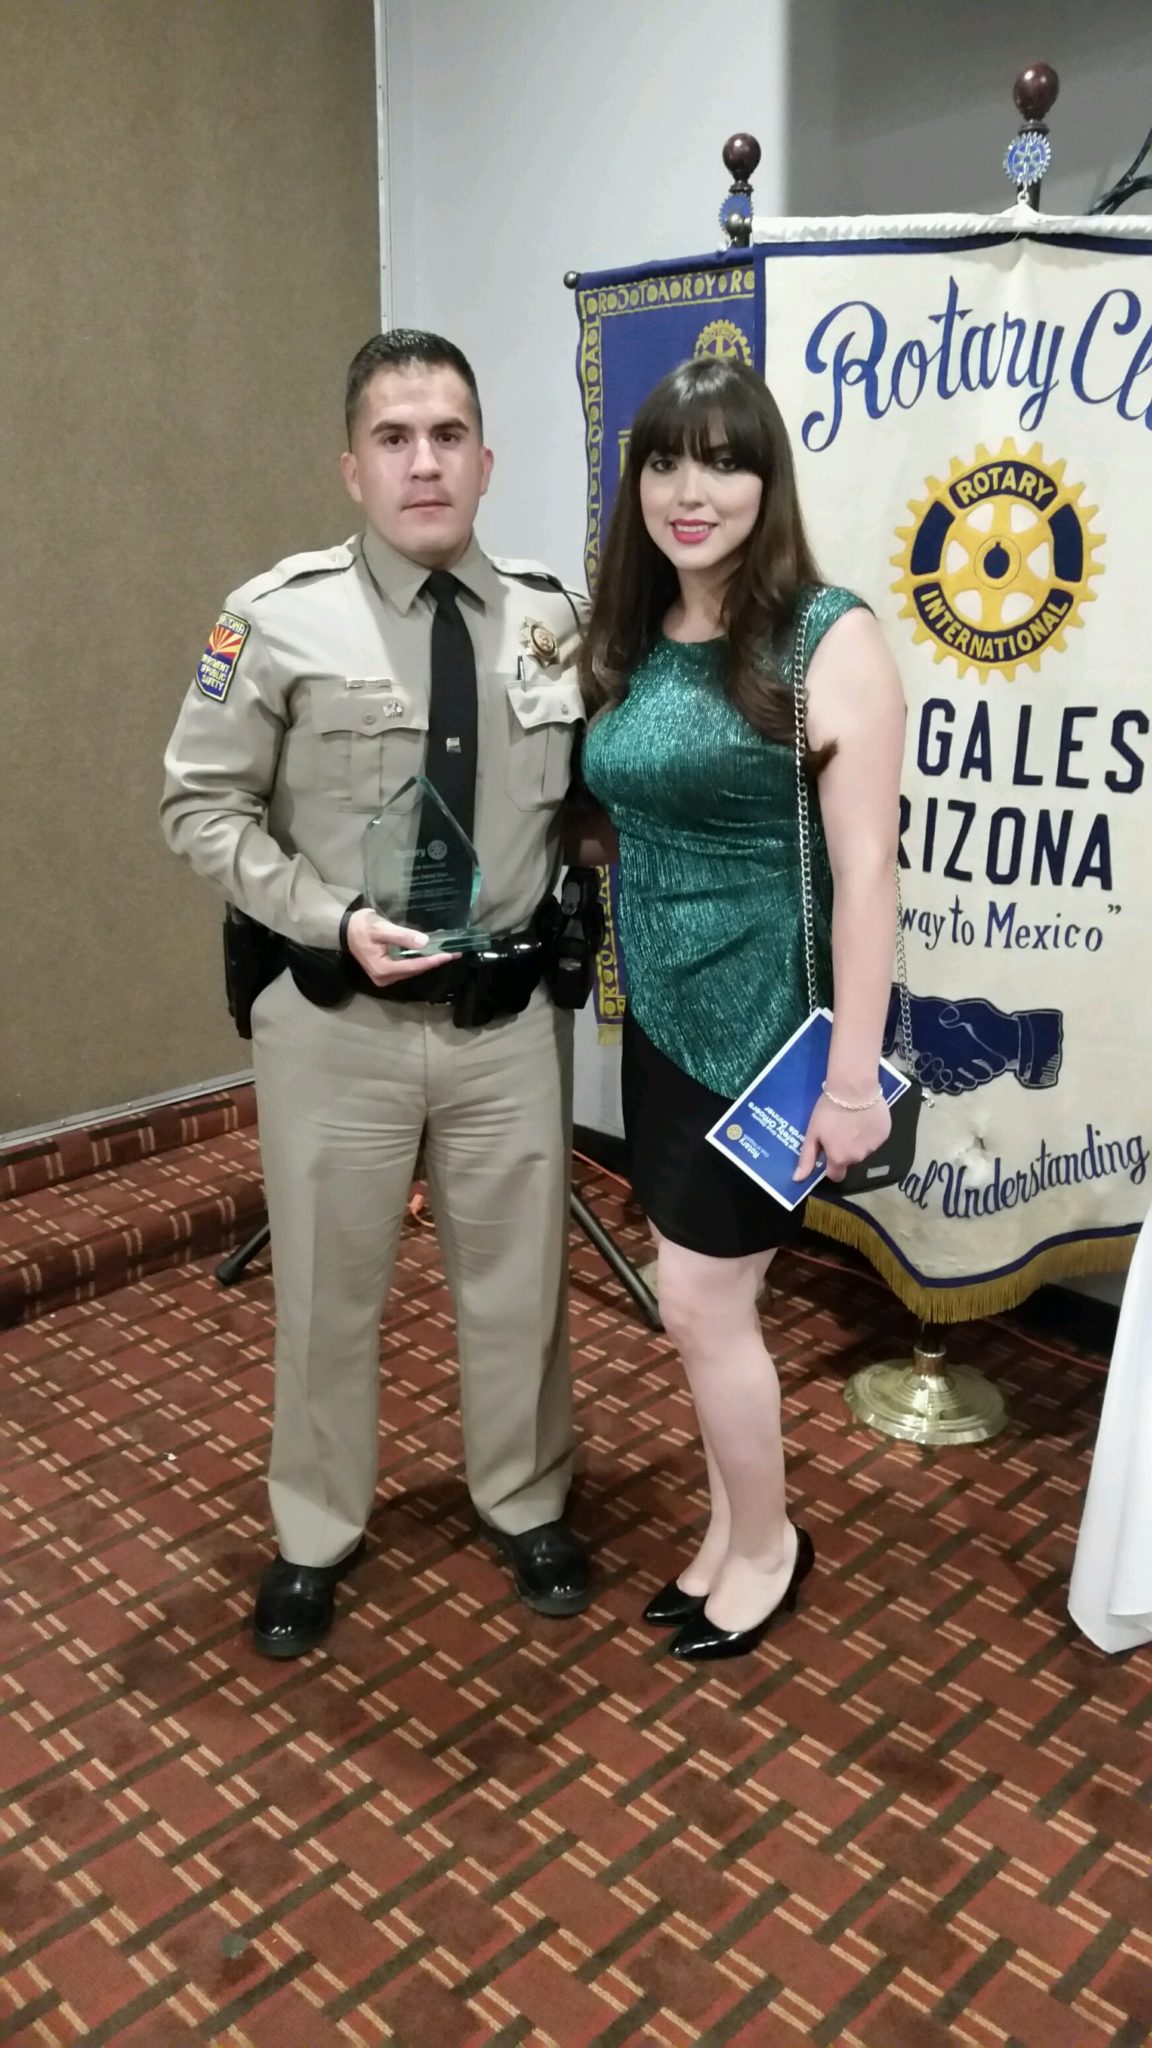 Trooper Diaz Rotary Club Officer of the Year